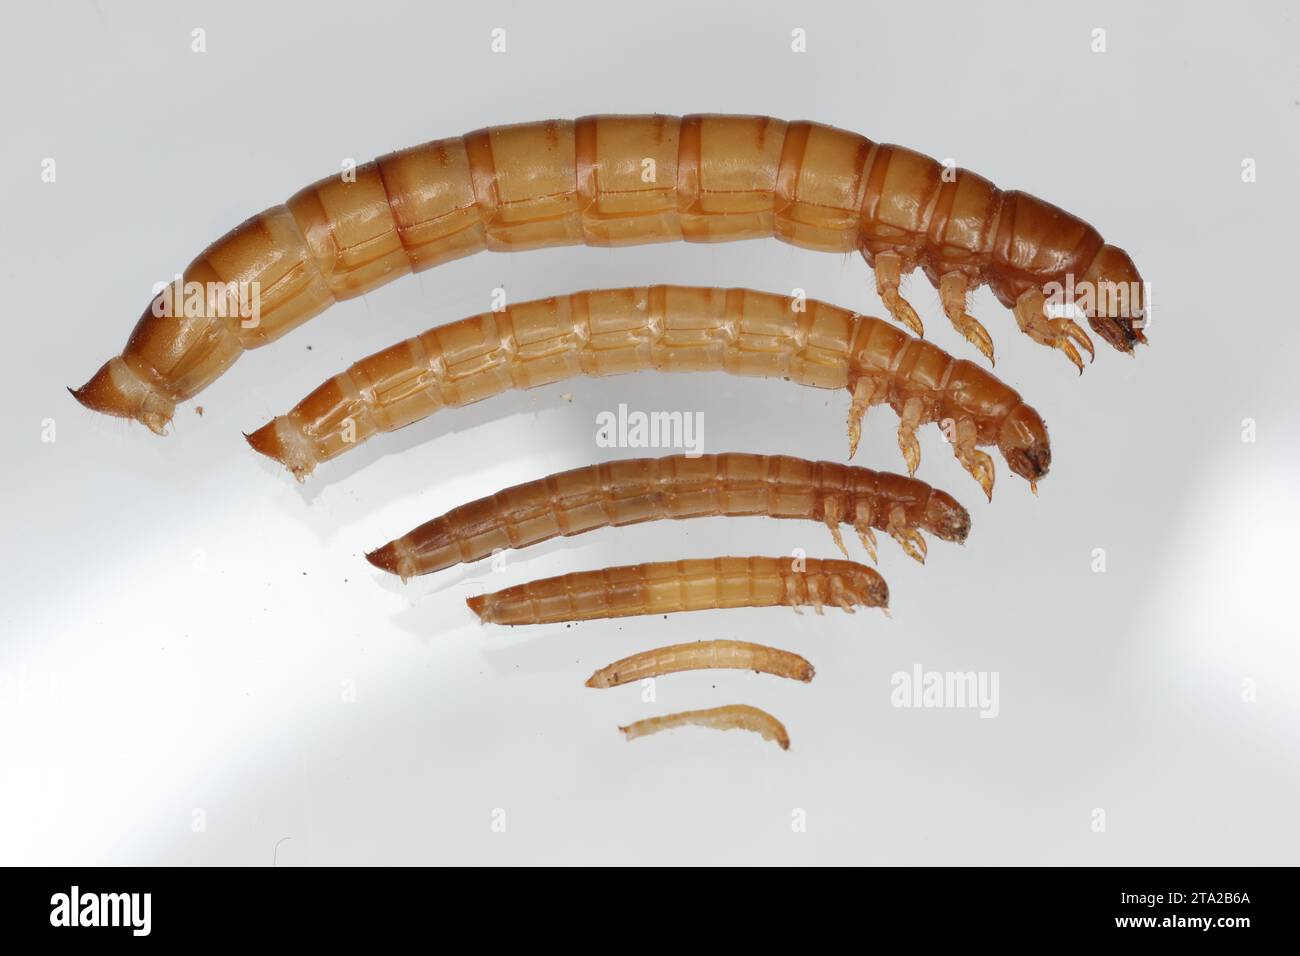 Yellow mealworm Tenebrio molitor beetle larva in their various stages of growth. Stock Photo